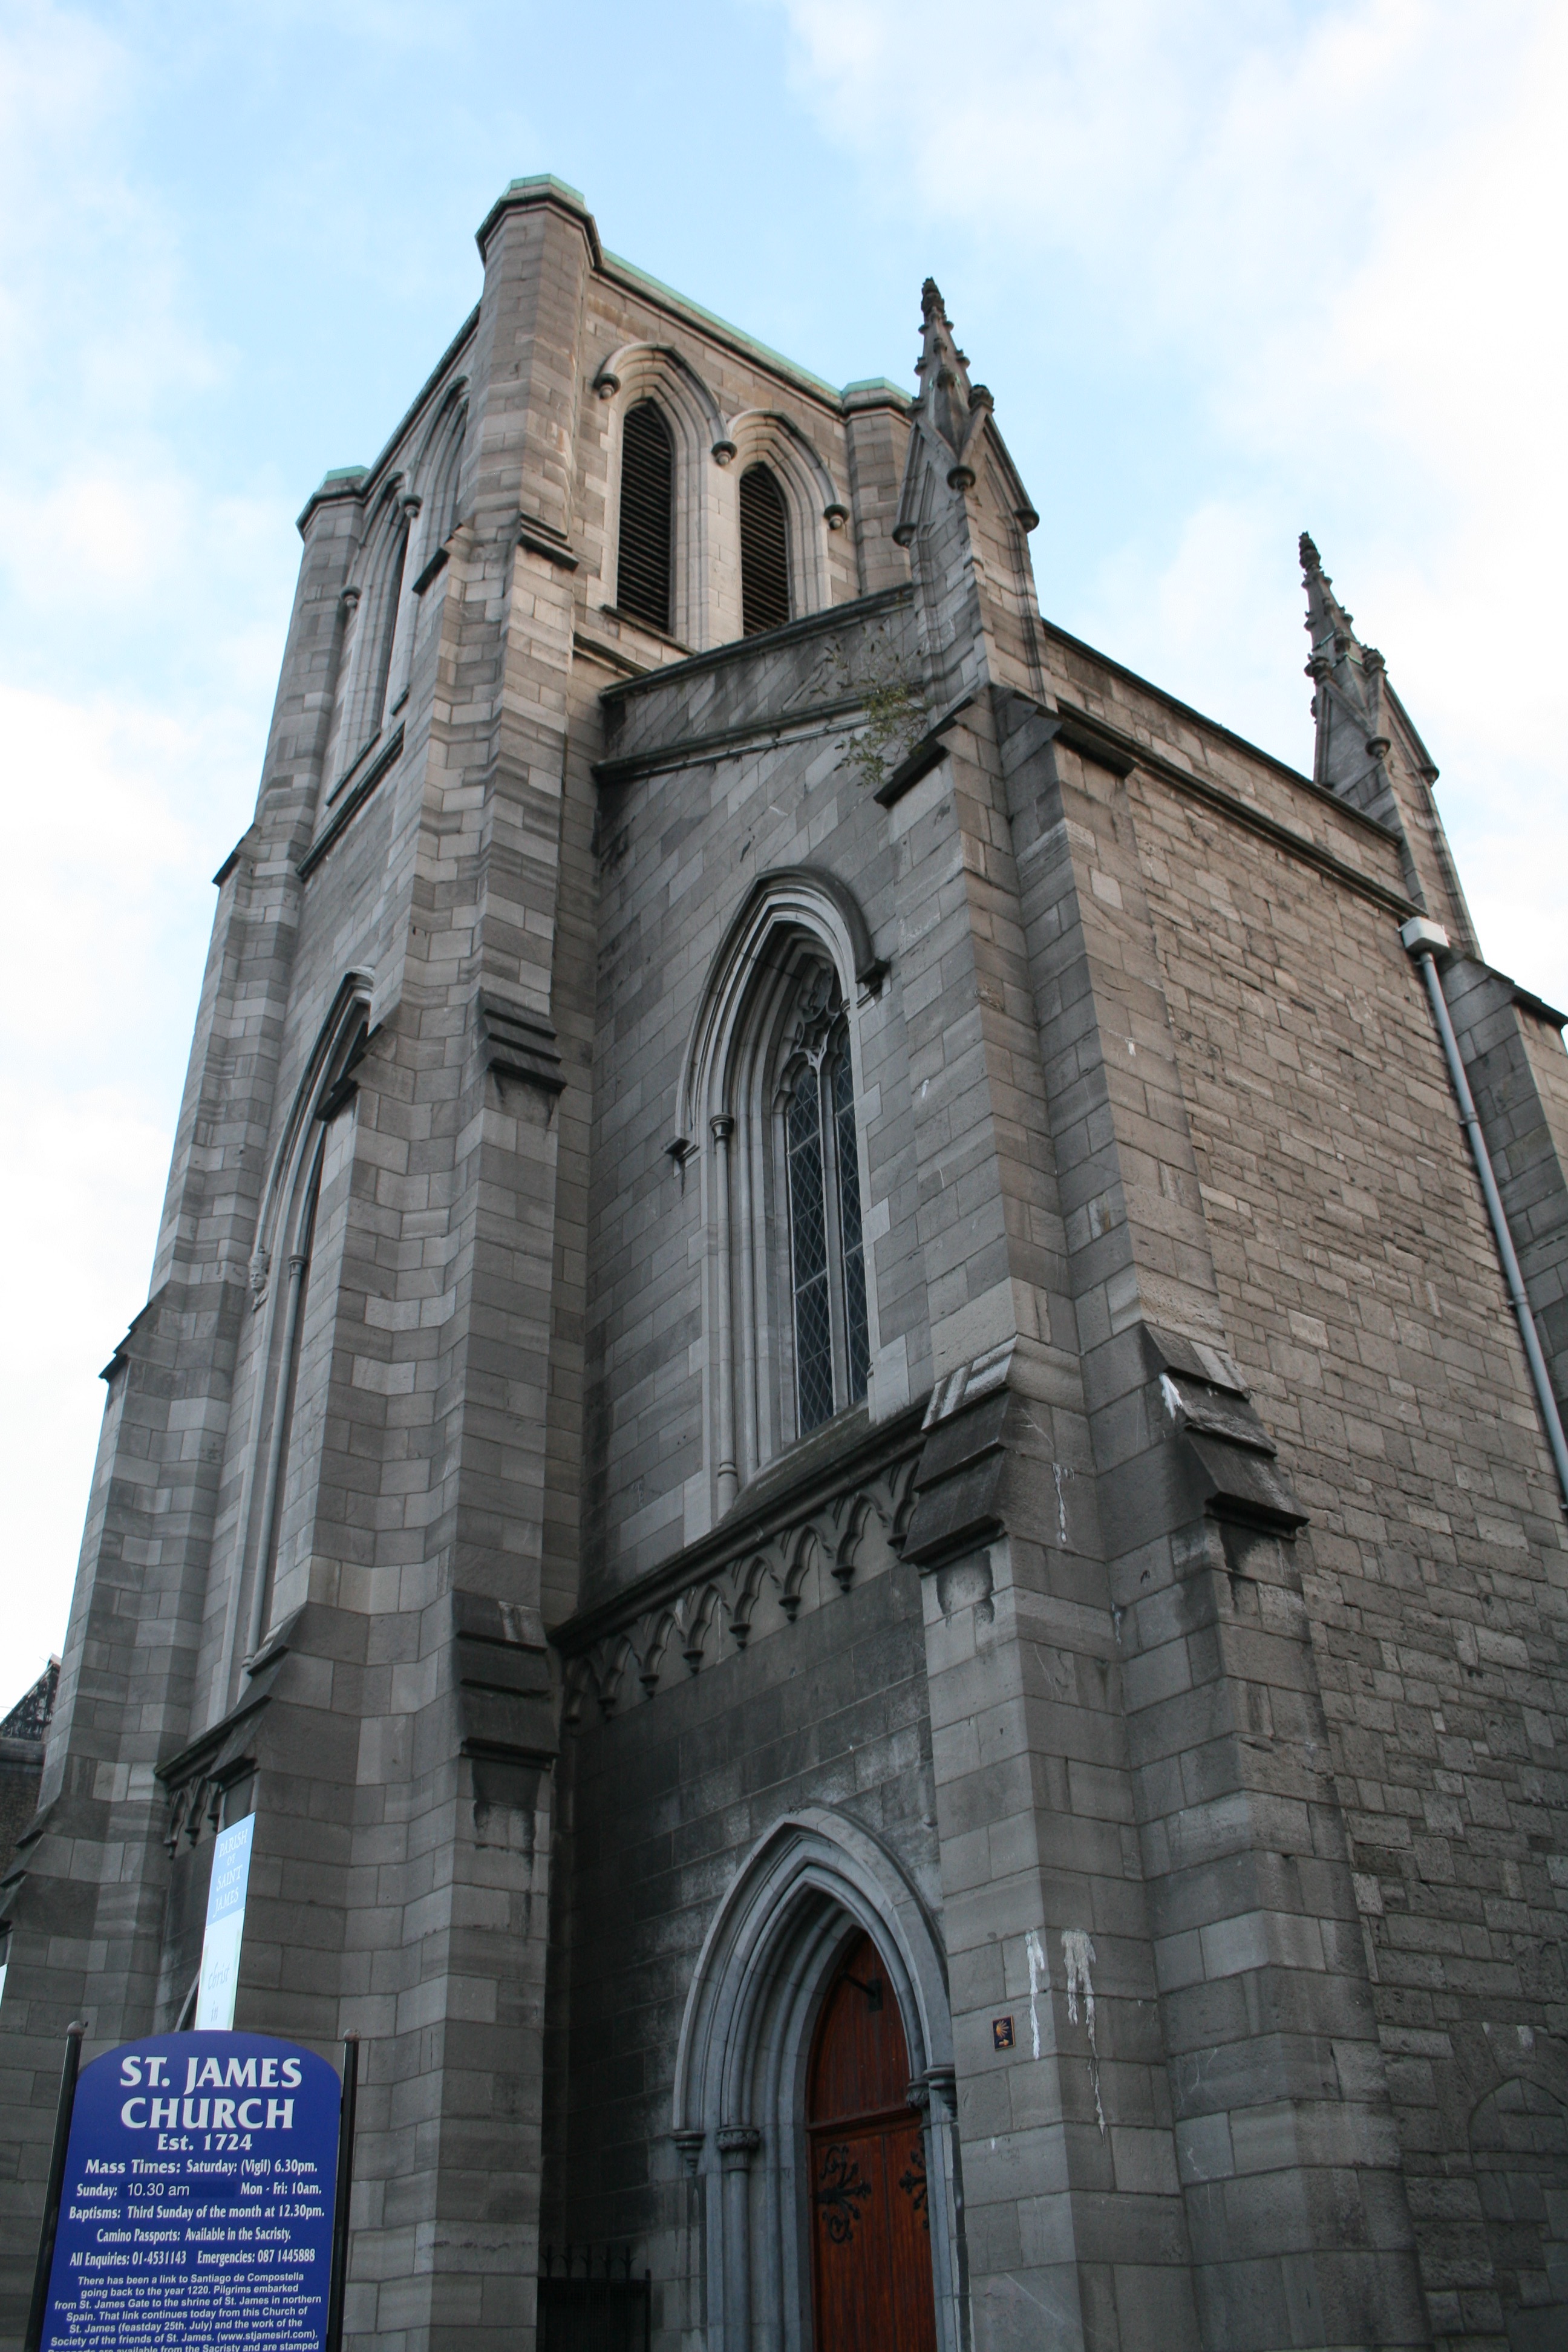 St. James Church on the grounds of Guinness in Dublin, Ireland.